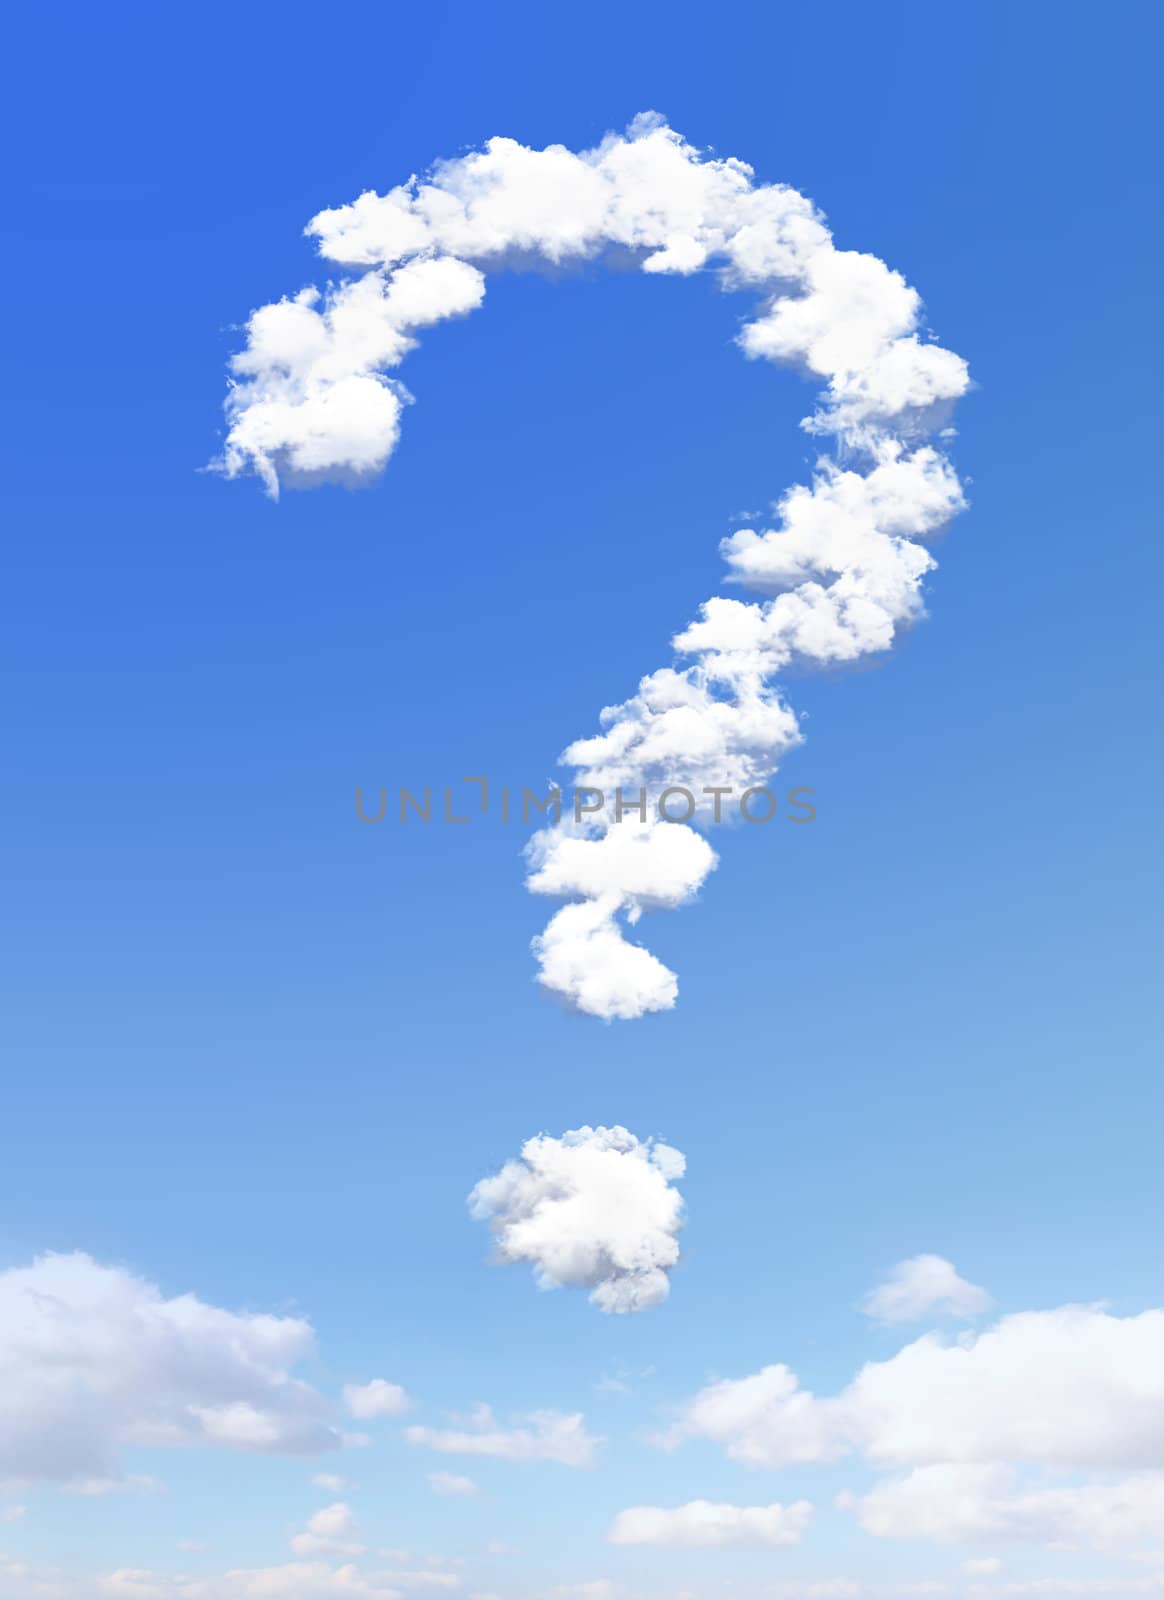 question mark shape of clouds on sky background